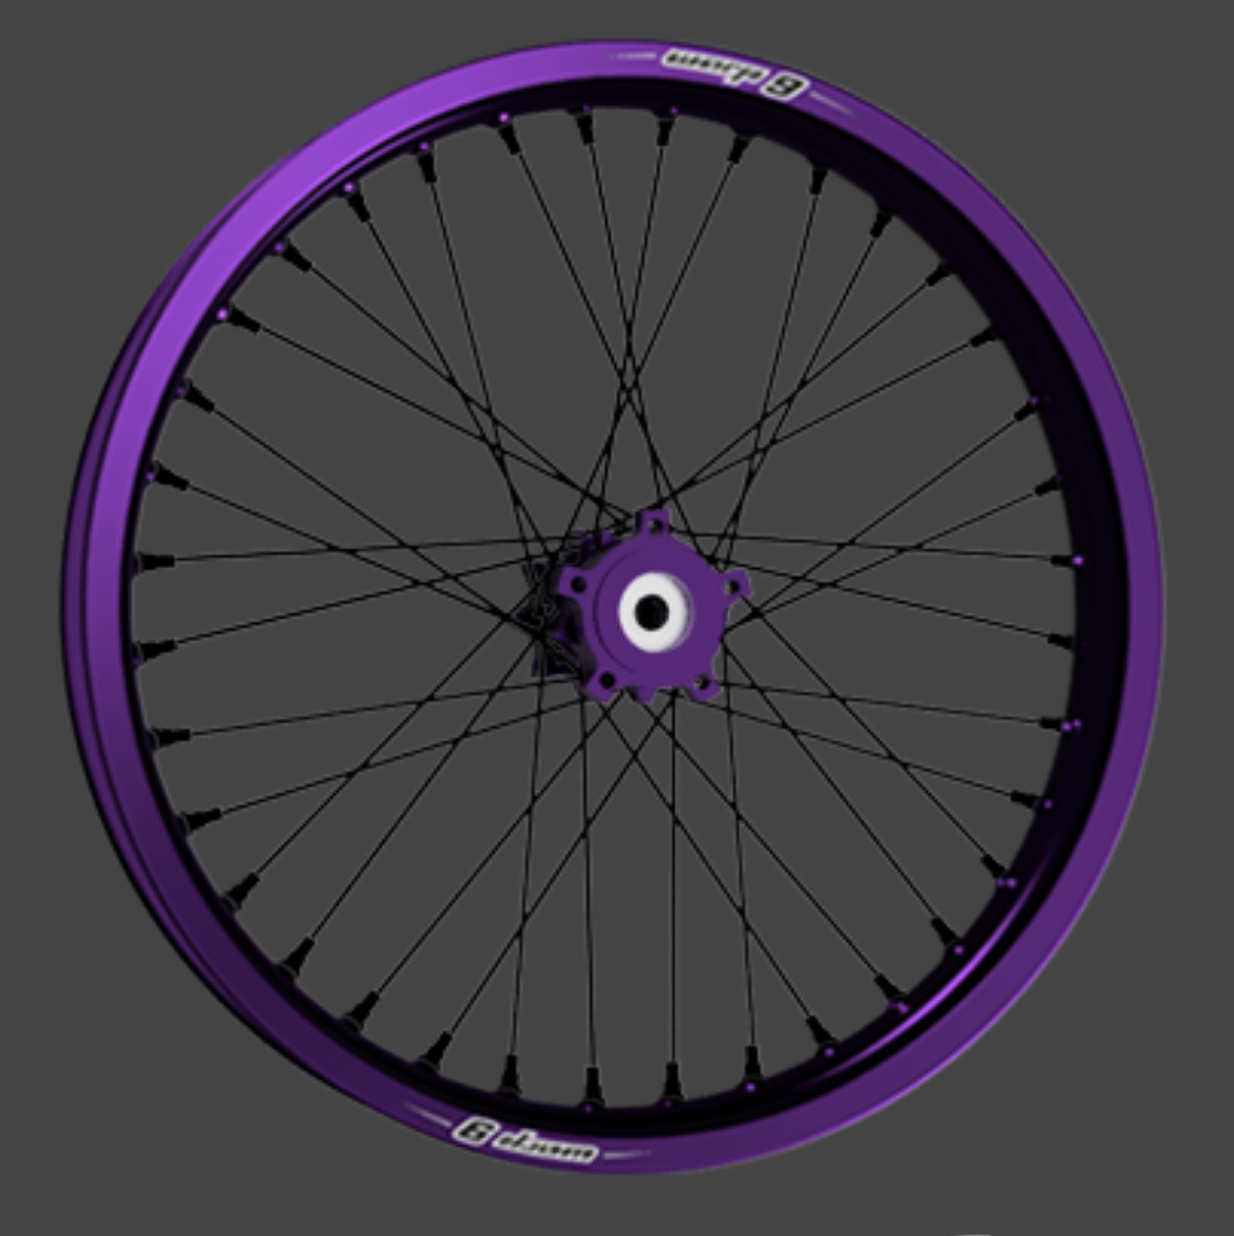 Warp 9 Wheelsets for Surron LBX (fast / immediate shipping!)